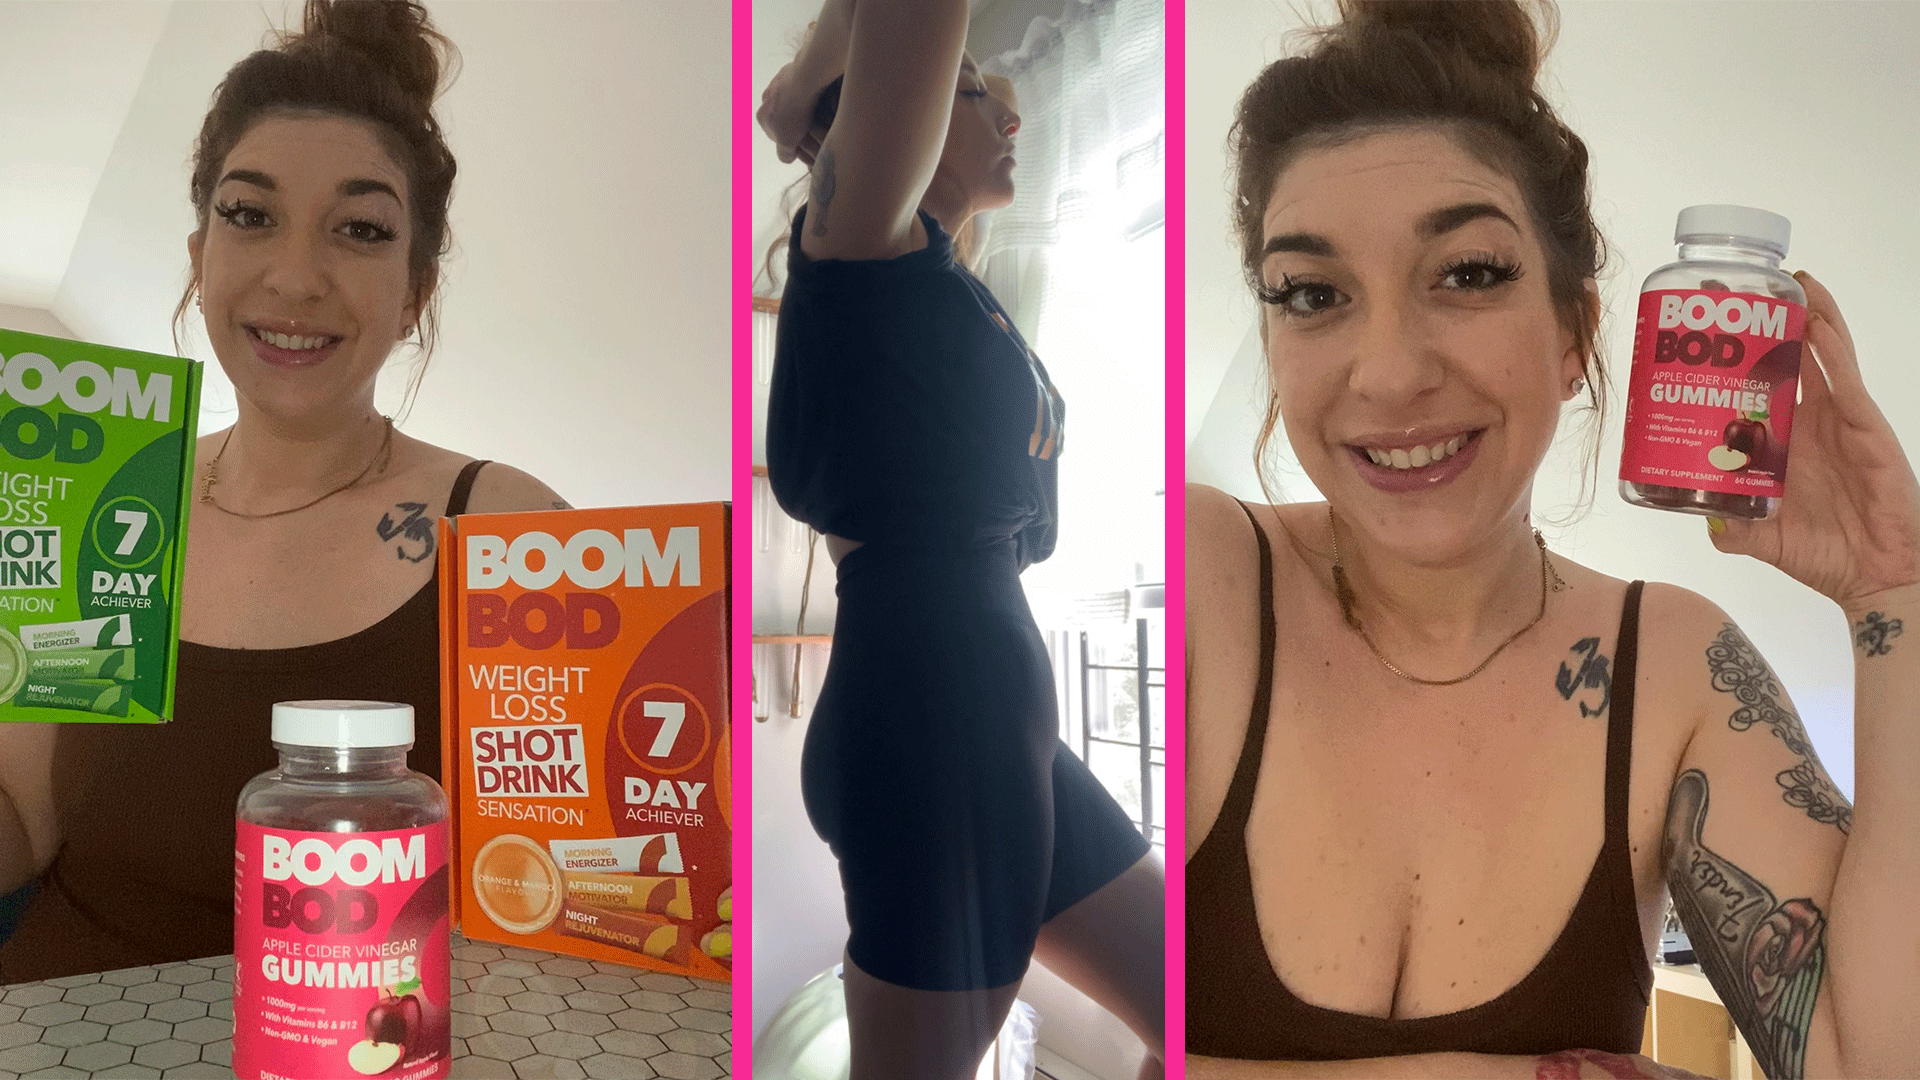 MARY'S TOTAL BOOMBOD TRANSFORMATION